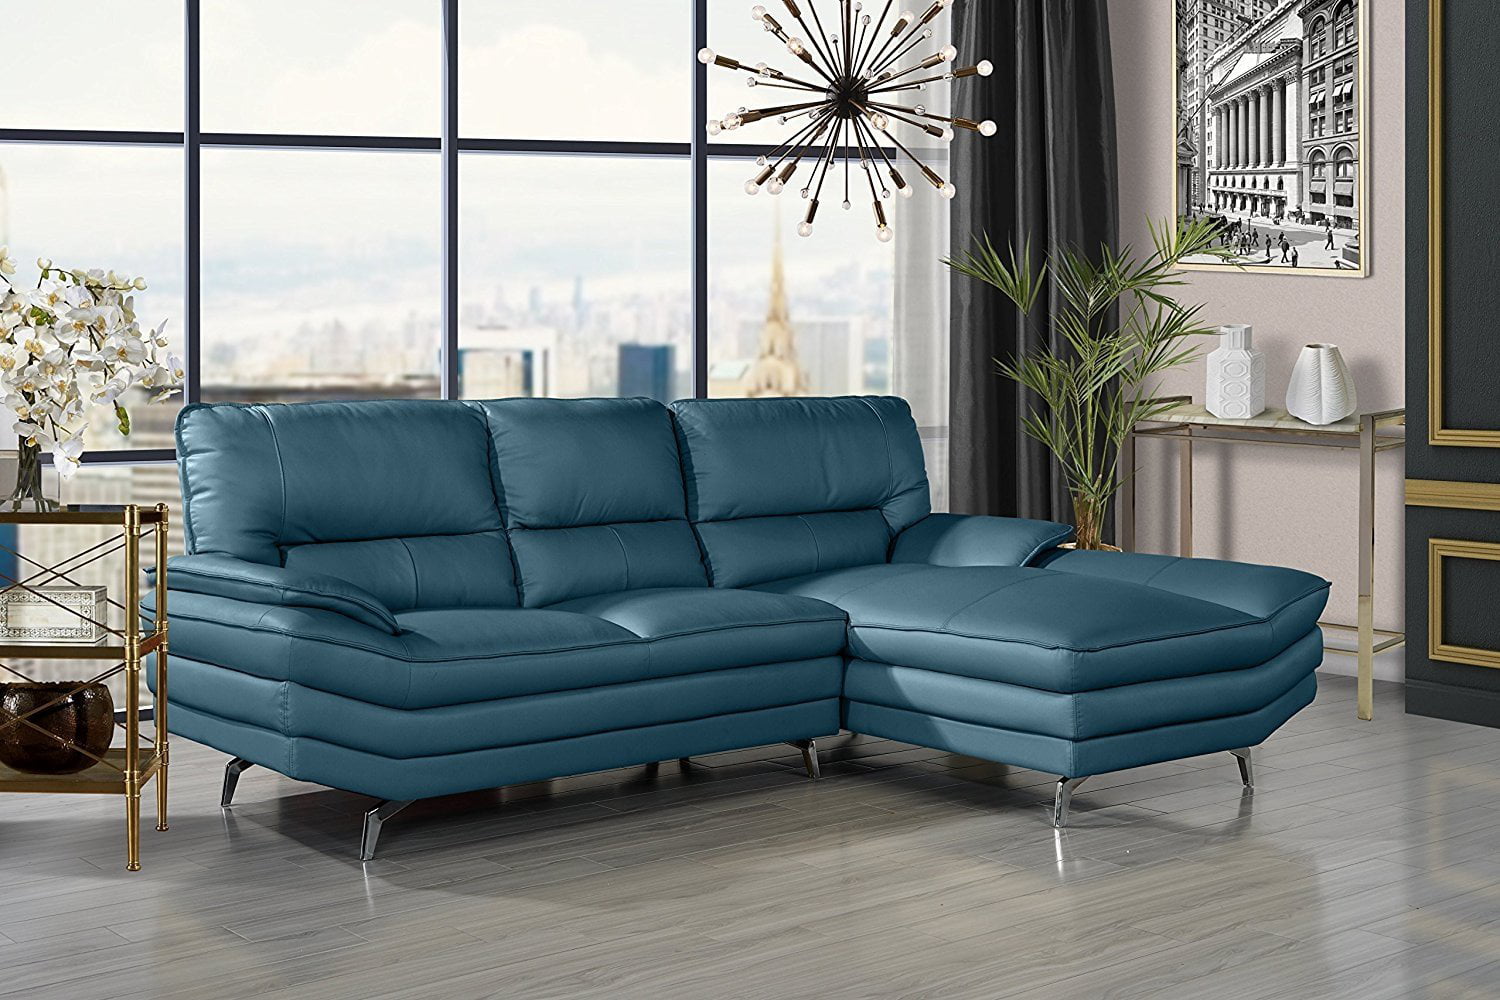 teal green leather sectional sofa